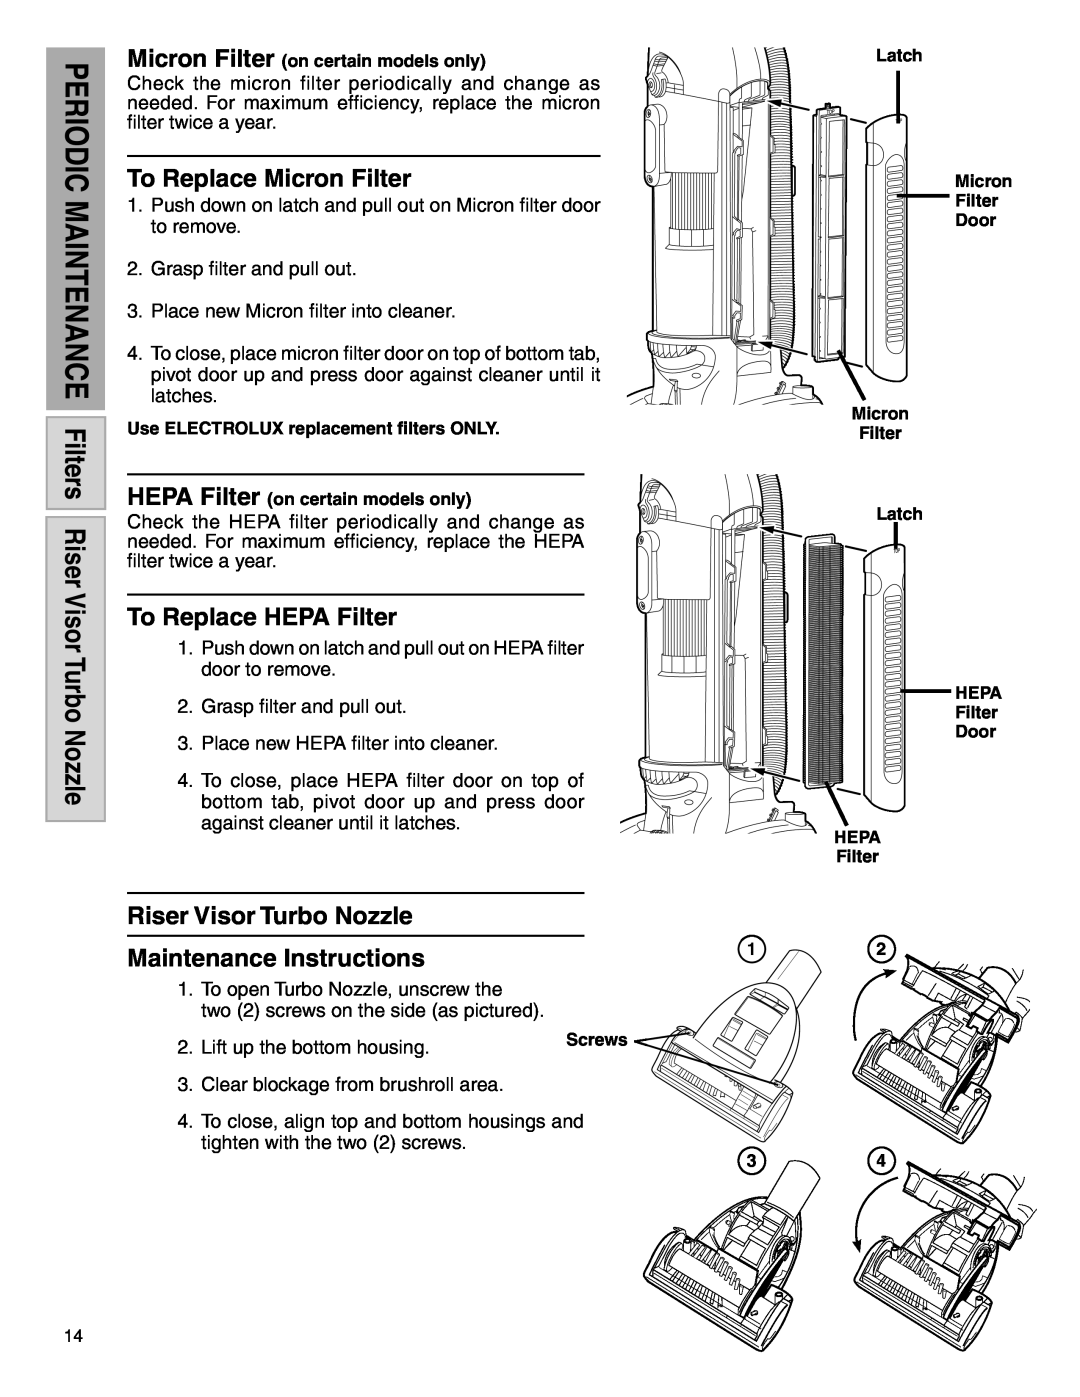 Electrolux Z5600 Series manual To Replace Micron Filter, To Replace HEPA Filter, Riser Visor Turbo Nozzle 